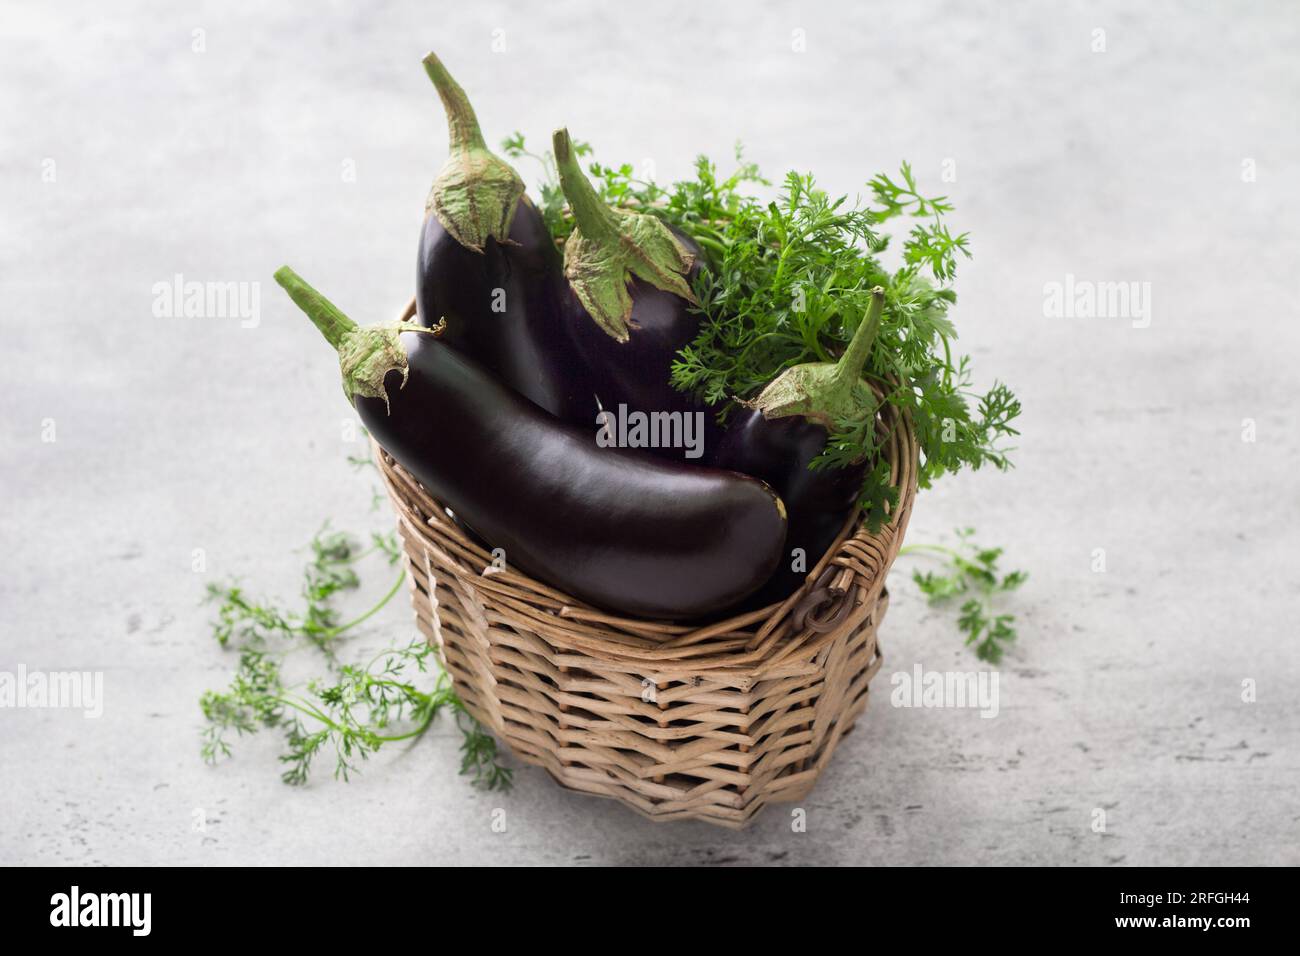 Wicker basket with ripe eggplants and herbs on a gray textured background. Stock Photo